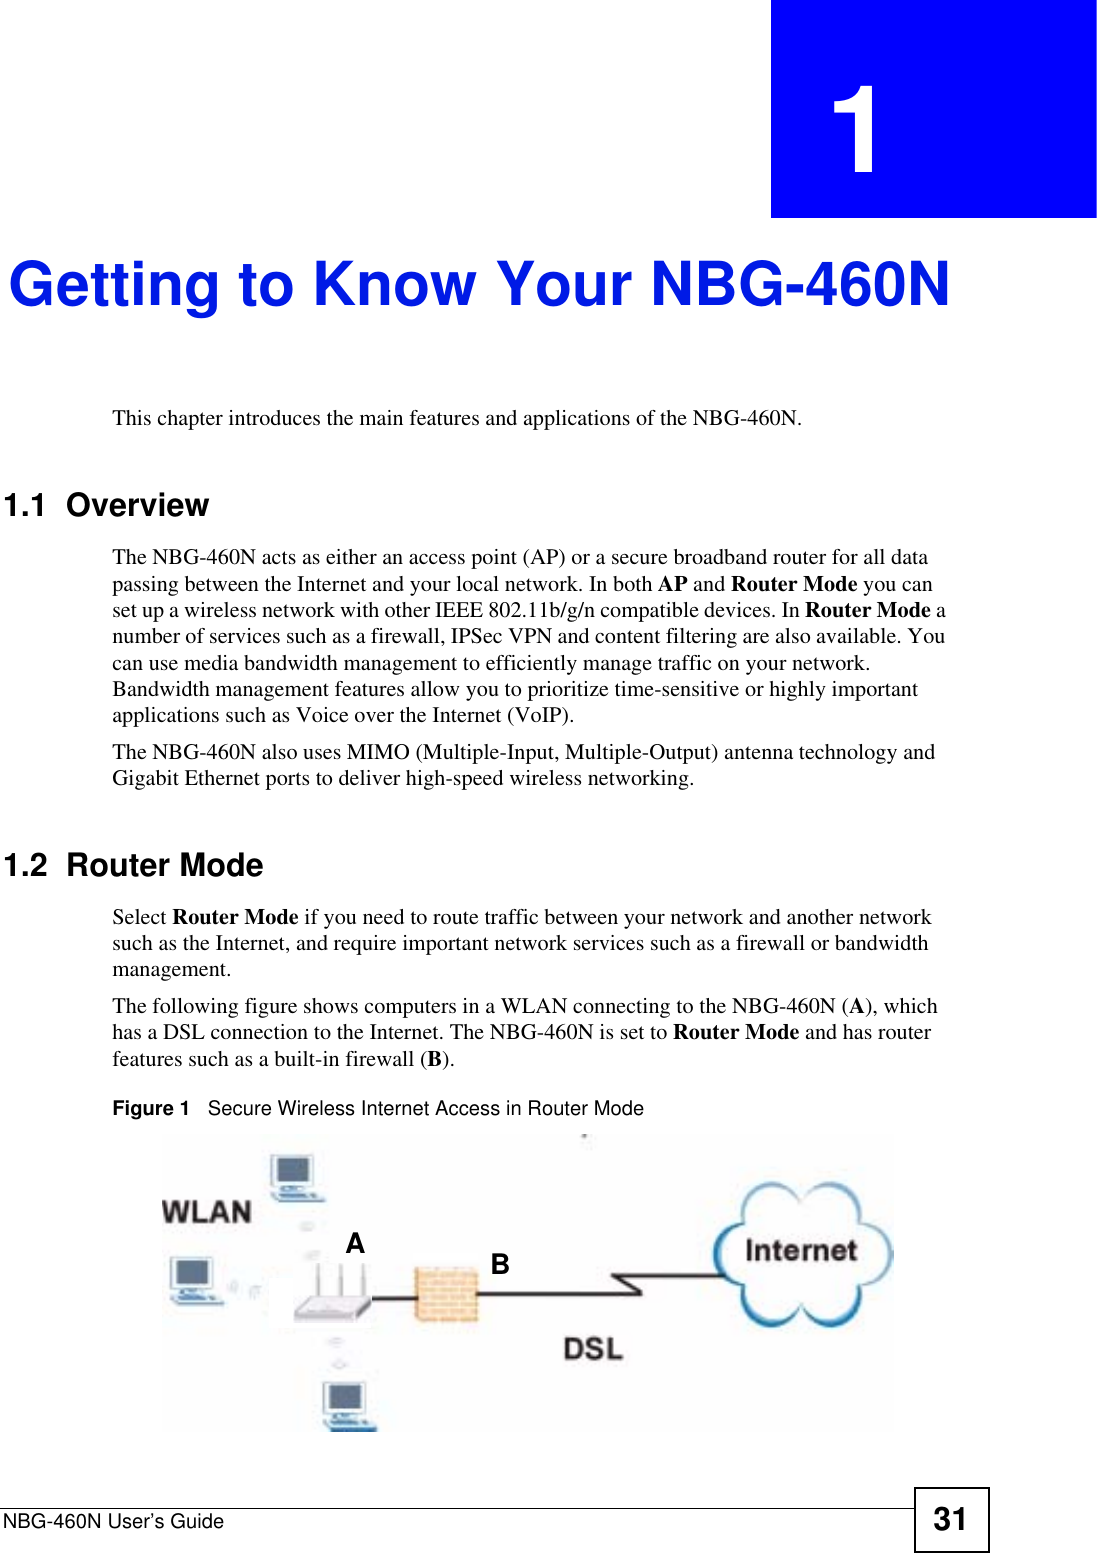 NBG-460N User’s Guide 31CHAPTER  1 Getting to Know Your NBG-460NThis chapter introduces the main features and applications of the NBG-460N.1.1  OverviewThe NBG-460N acts as either an access point (AP) or a secure broadband router for all data passing between the Internet and your local network. In both AP and Router Mode you can set up a wireless network with other IEEE 802.11b/g/n compatible devices. In Router Mode a number of services such as a firewall, IPSec VPN and content filtering are also available. You can use media bandwidth management to efficiently manage traffic on your network. Bandwidth management features allow you to prioritize time-sensitive or highly important applications such as Voice over the Internet (VoIP).The NBG-460N also uses MIMO (Multiple-Input, Multiple-Output) antenna technology and Gigabit Ethernet ports to deliver high-speed wireless networking.1.2  Router ModeSelect Router Mode if you need to route traffic between your network and another network such as the Internet, and require important network services such as a firewall or bandwidth management. The following figure shows computers in a WLAN connecting to the NBG-460N (A), which has a DSL connection to the Internet. The NBG-460N is set to Router Mode and has router features such as a built-in firewall (B).Figure 1   Secure Wireless Internet Access in Router Mode AB